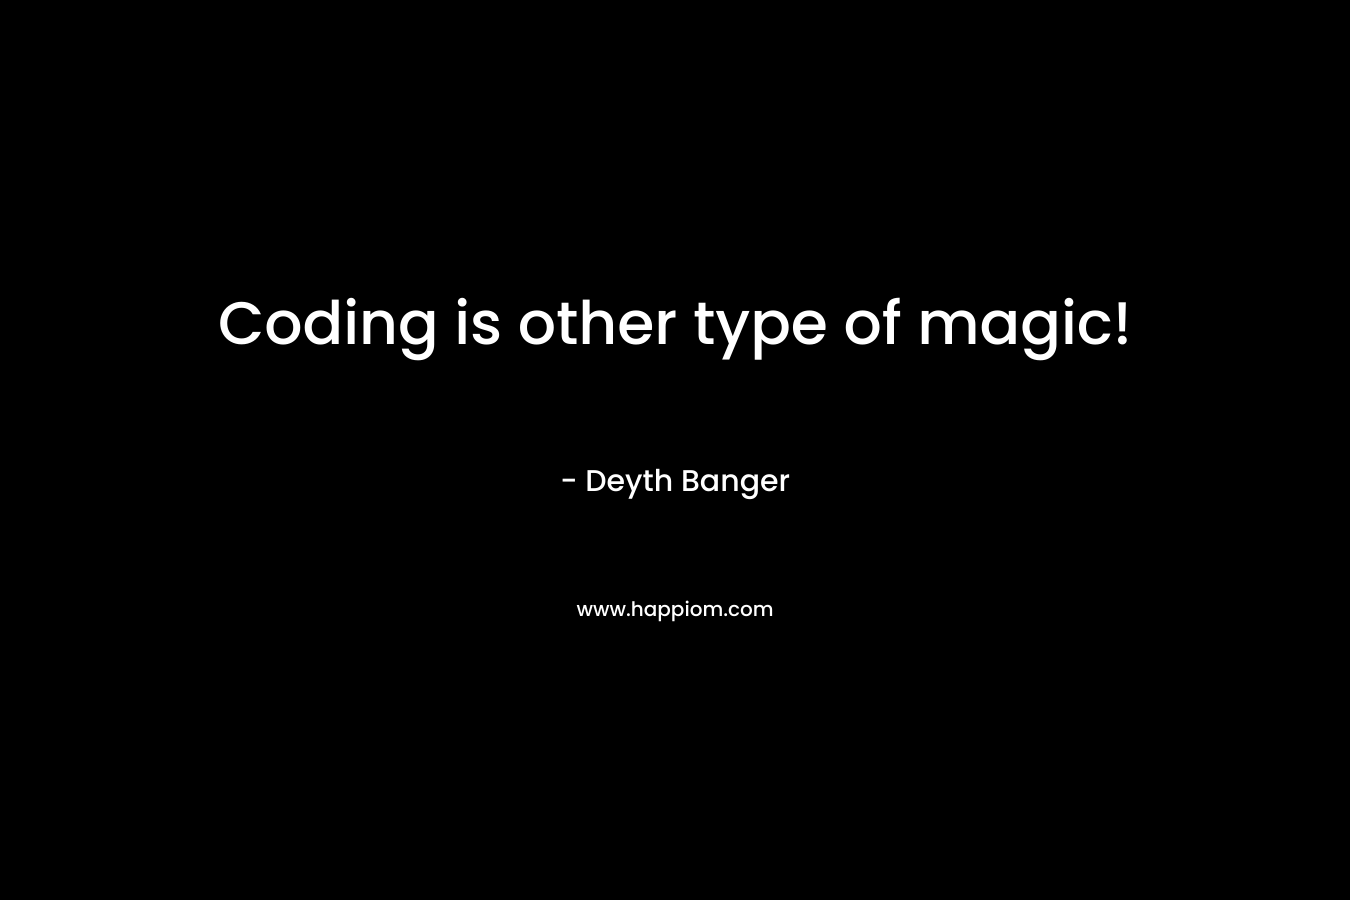 Coding is other type of magic!